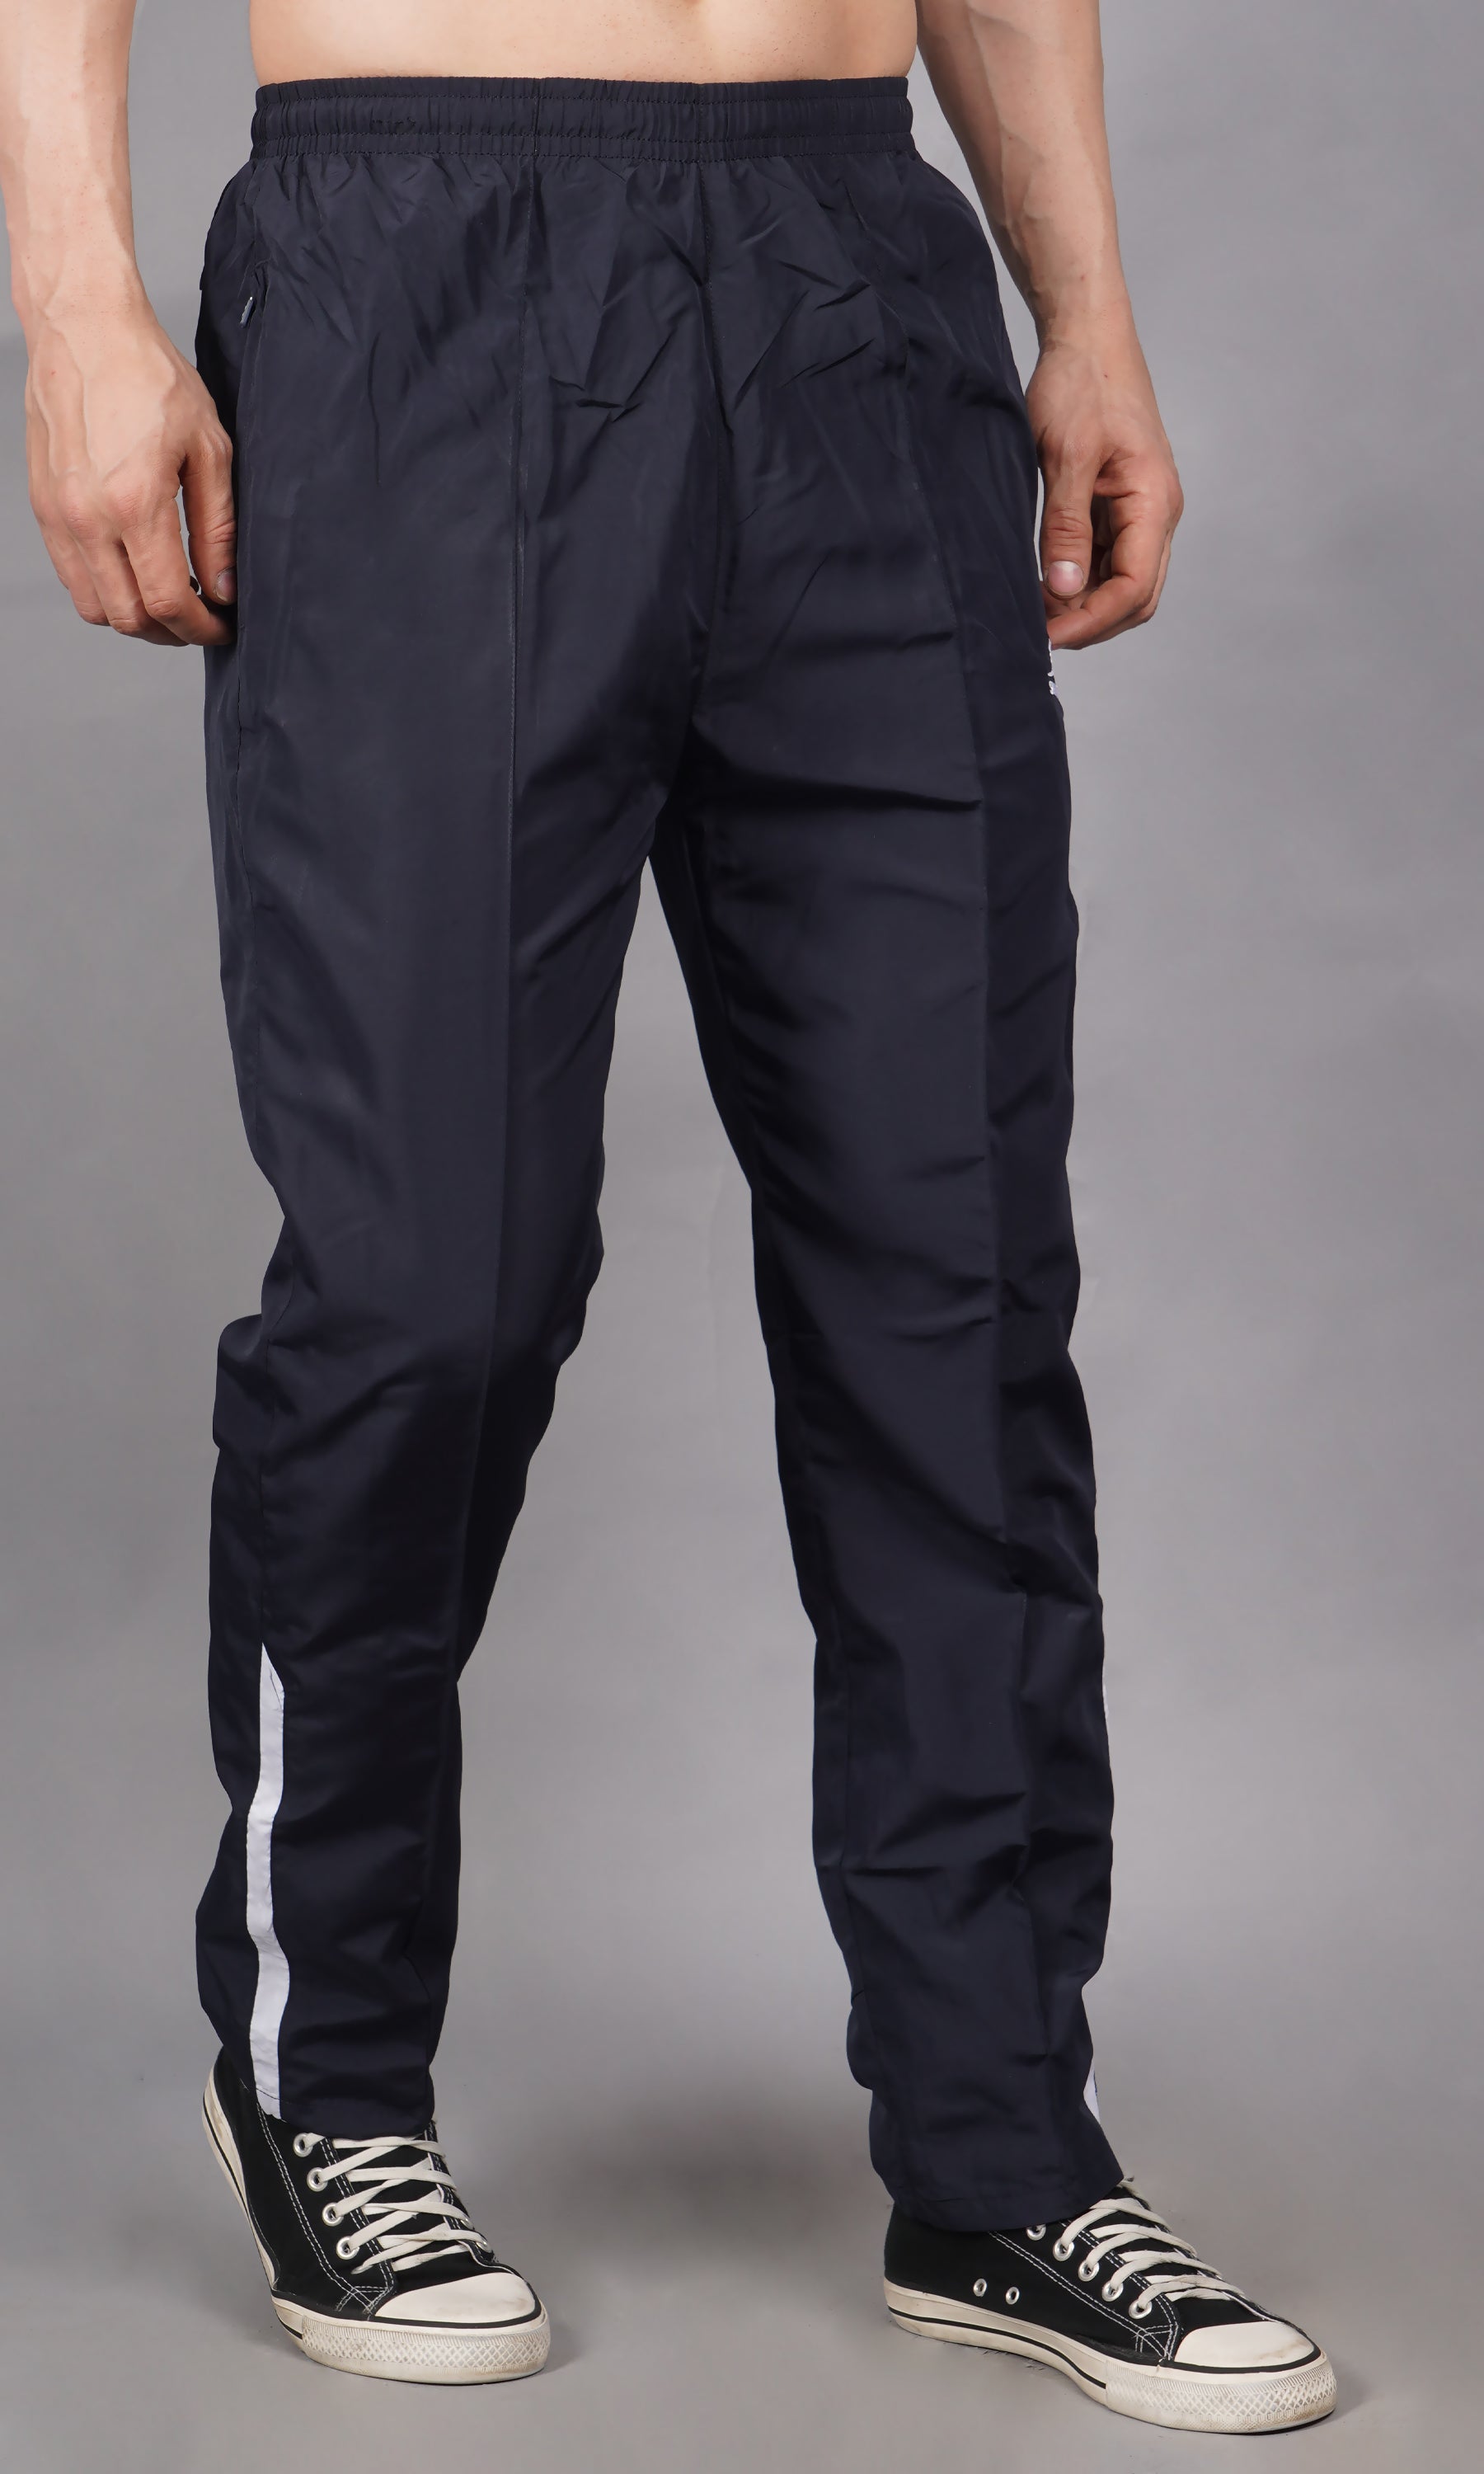 Best Price Polyester Track Pants at Best Price in Ahmedabad | Sunstar  Apparels Pvt. Ltd.